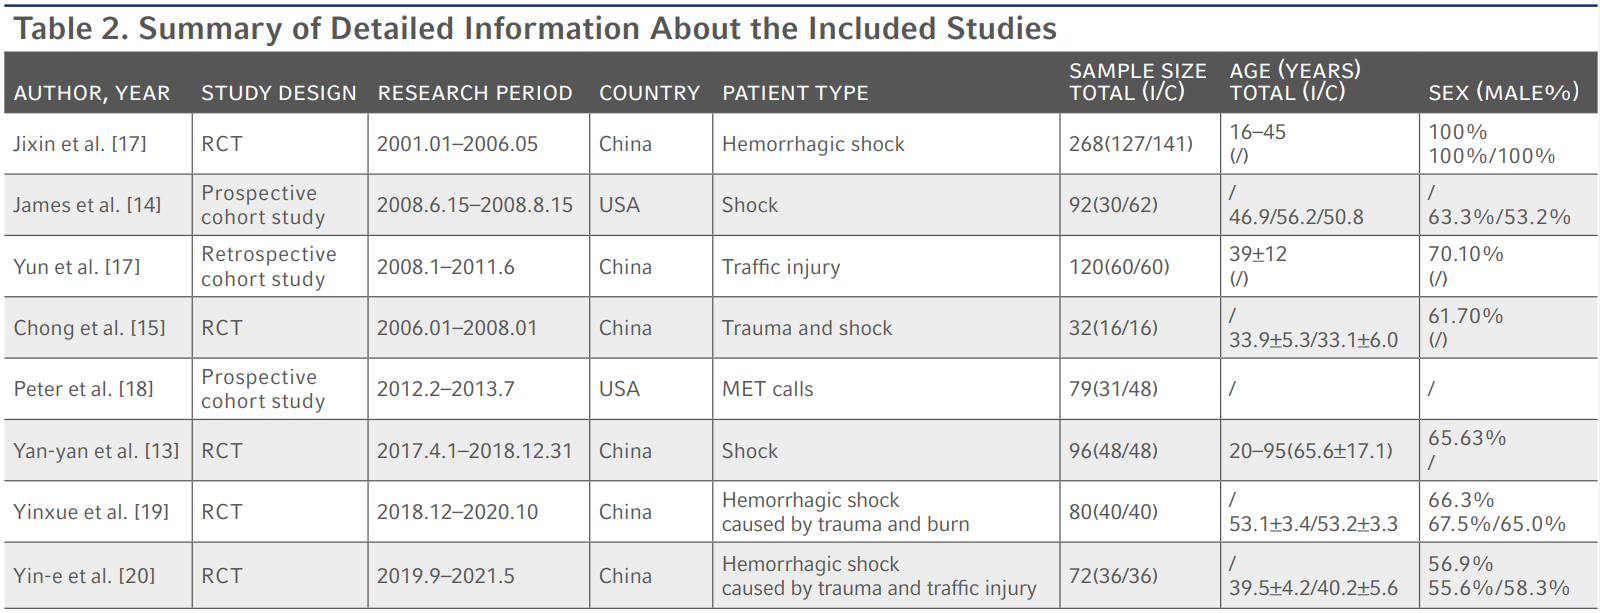 Table 2. Summary of Detailed Information About the Included Studies